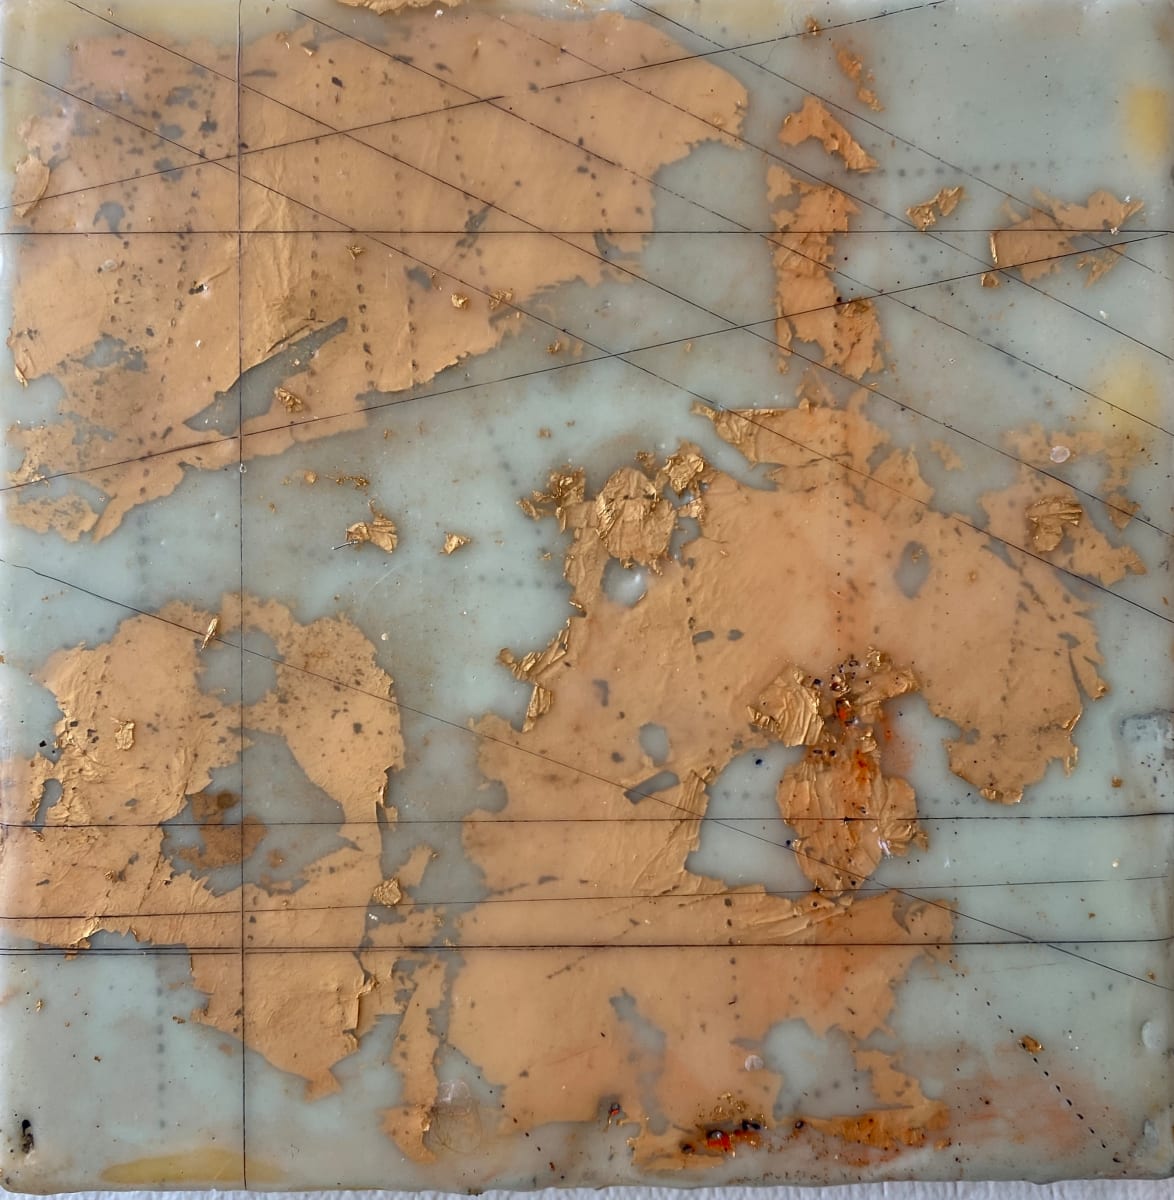 Mapping Series 001  Image: Mapping Series 001
Encaustic mixed media
6x6"